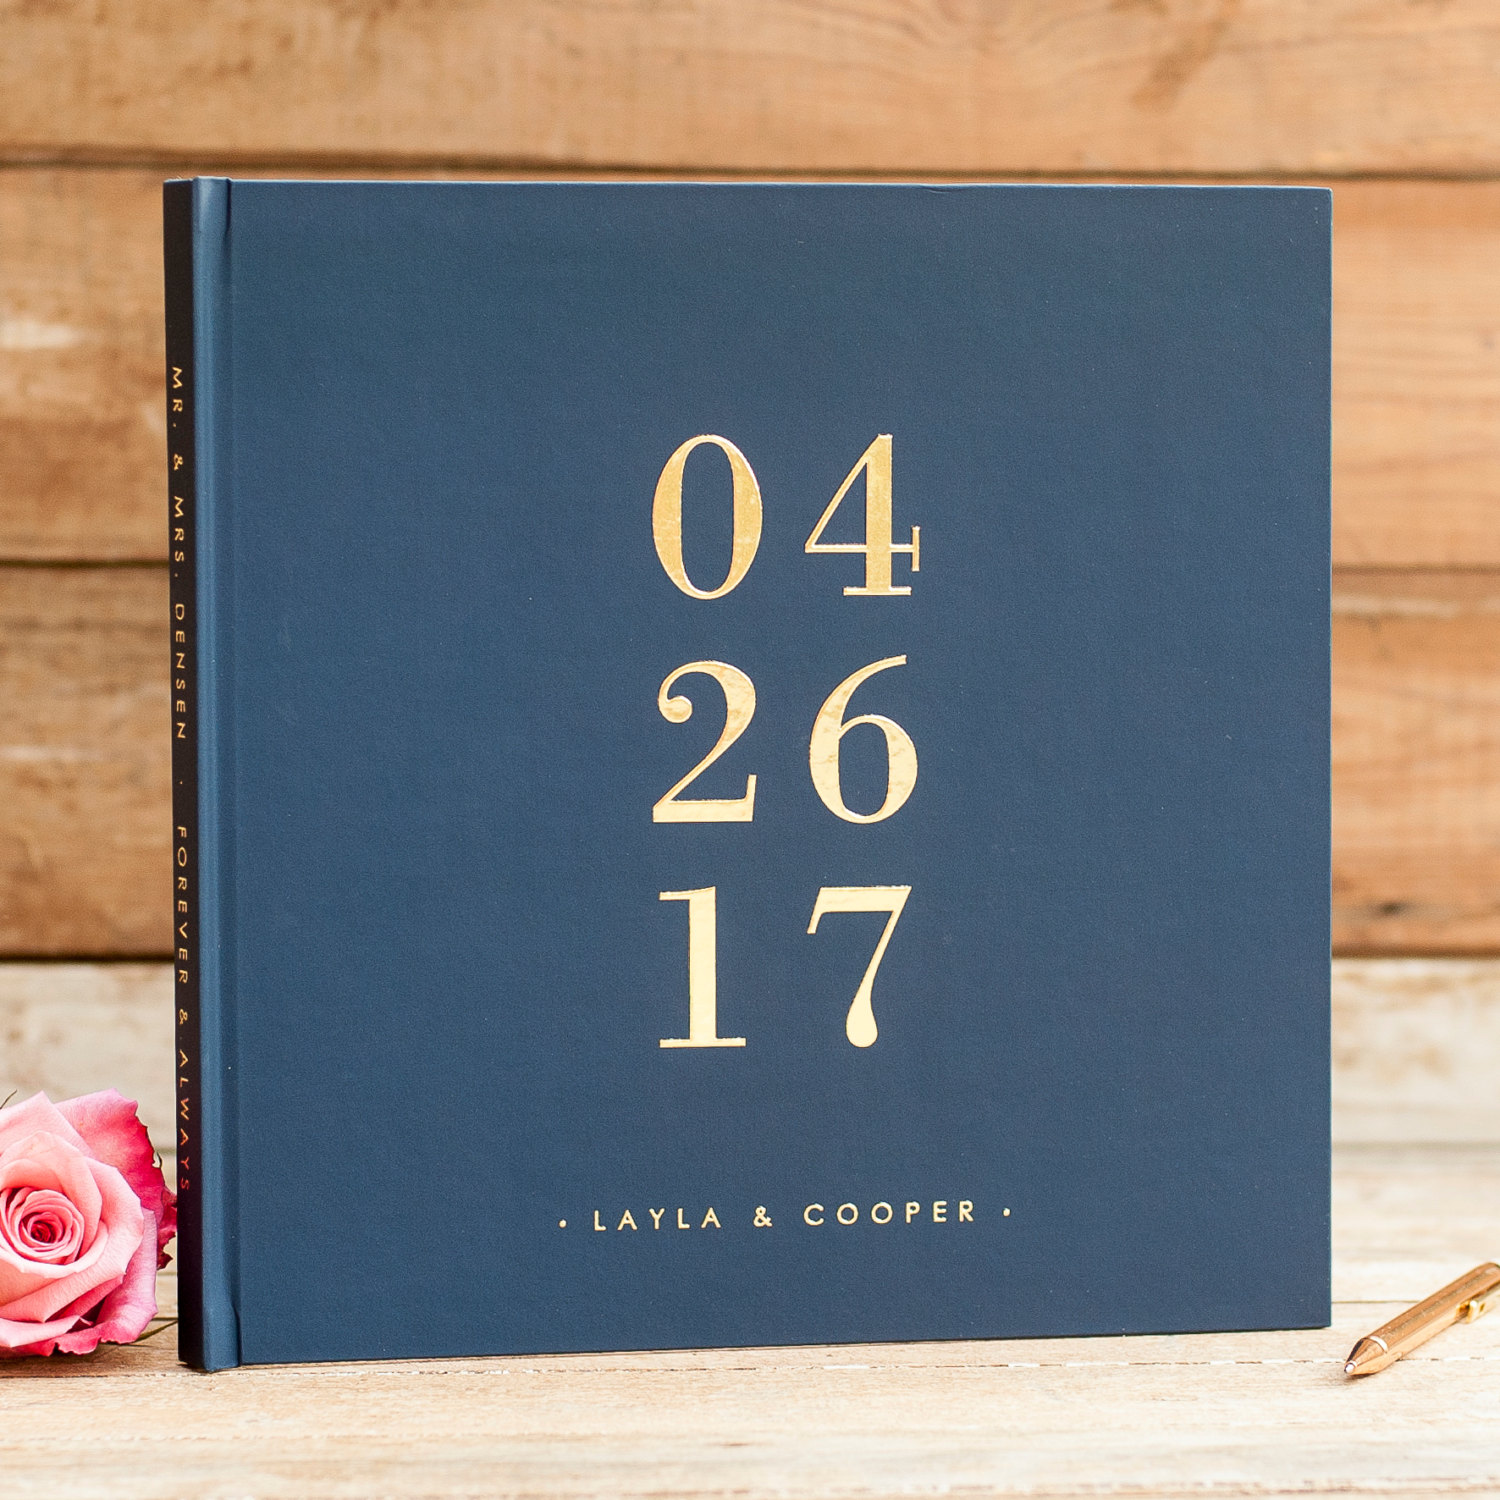 Gold Foil Guest Books - made from real foil! By Starboard Press. | https://emmalinebride.com/wedding/gold-foil-guest-books/